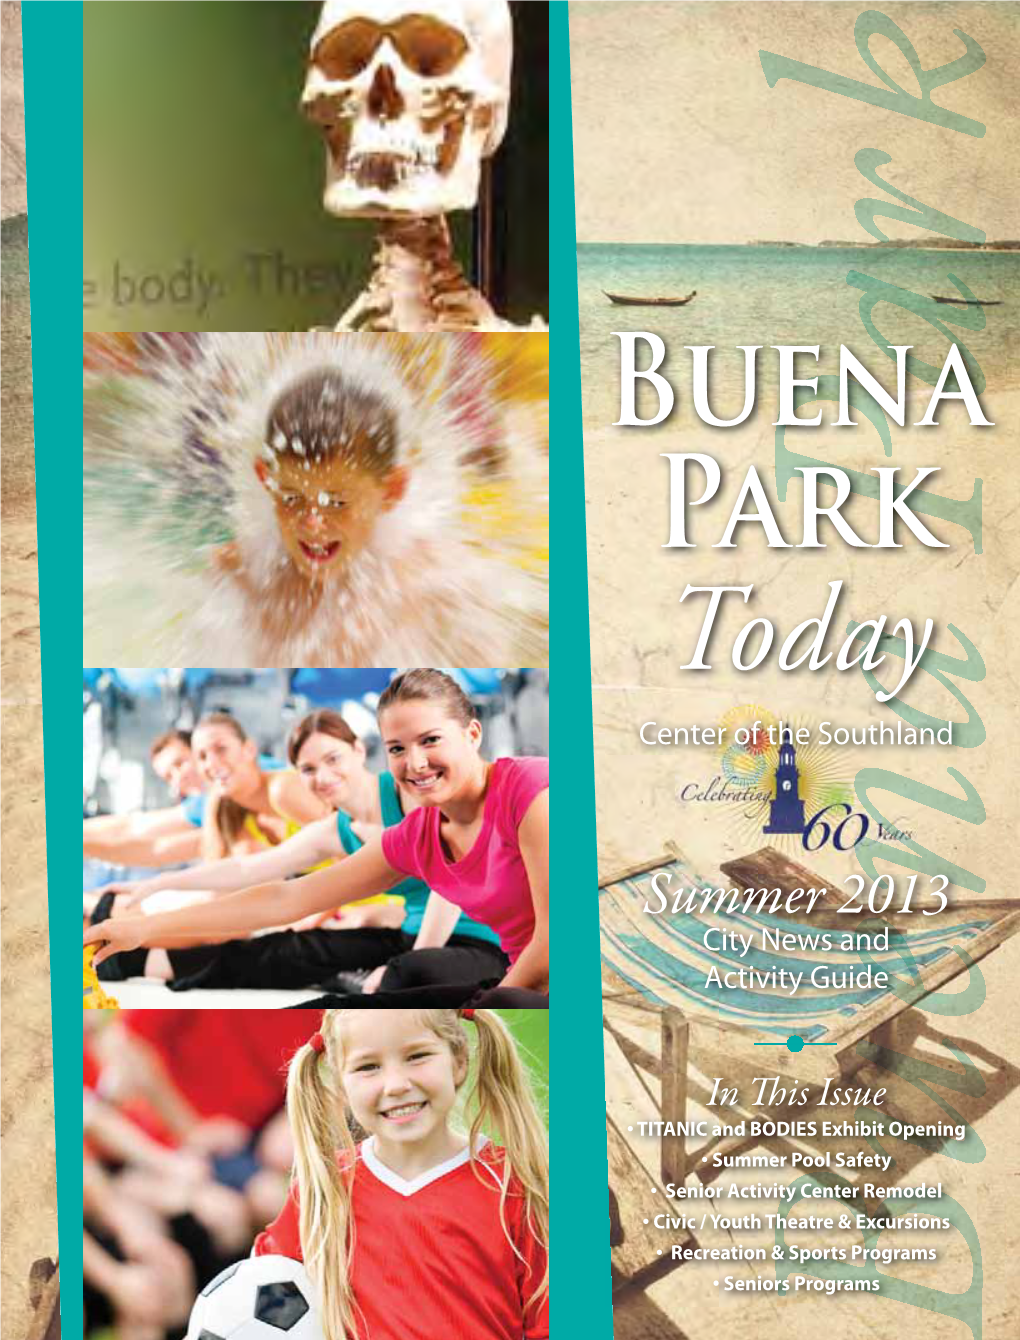 Summer 2013 City News and Activity Guide